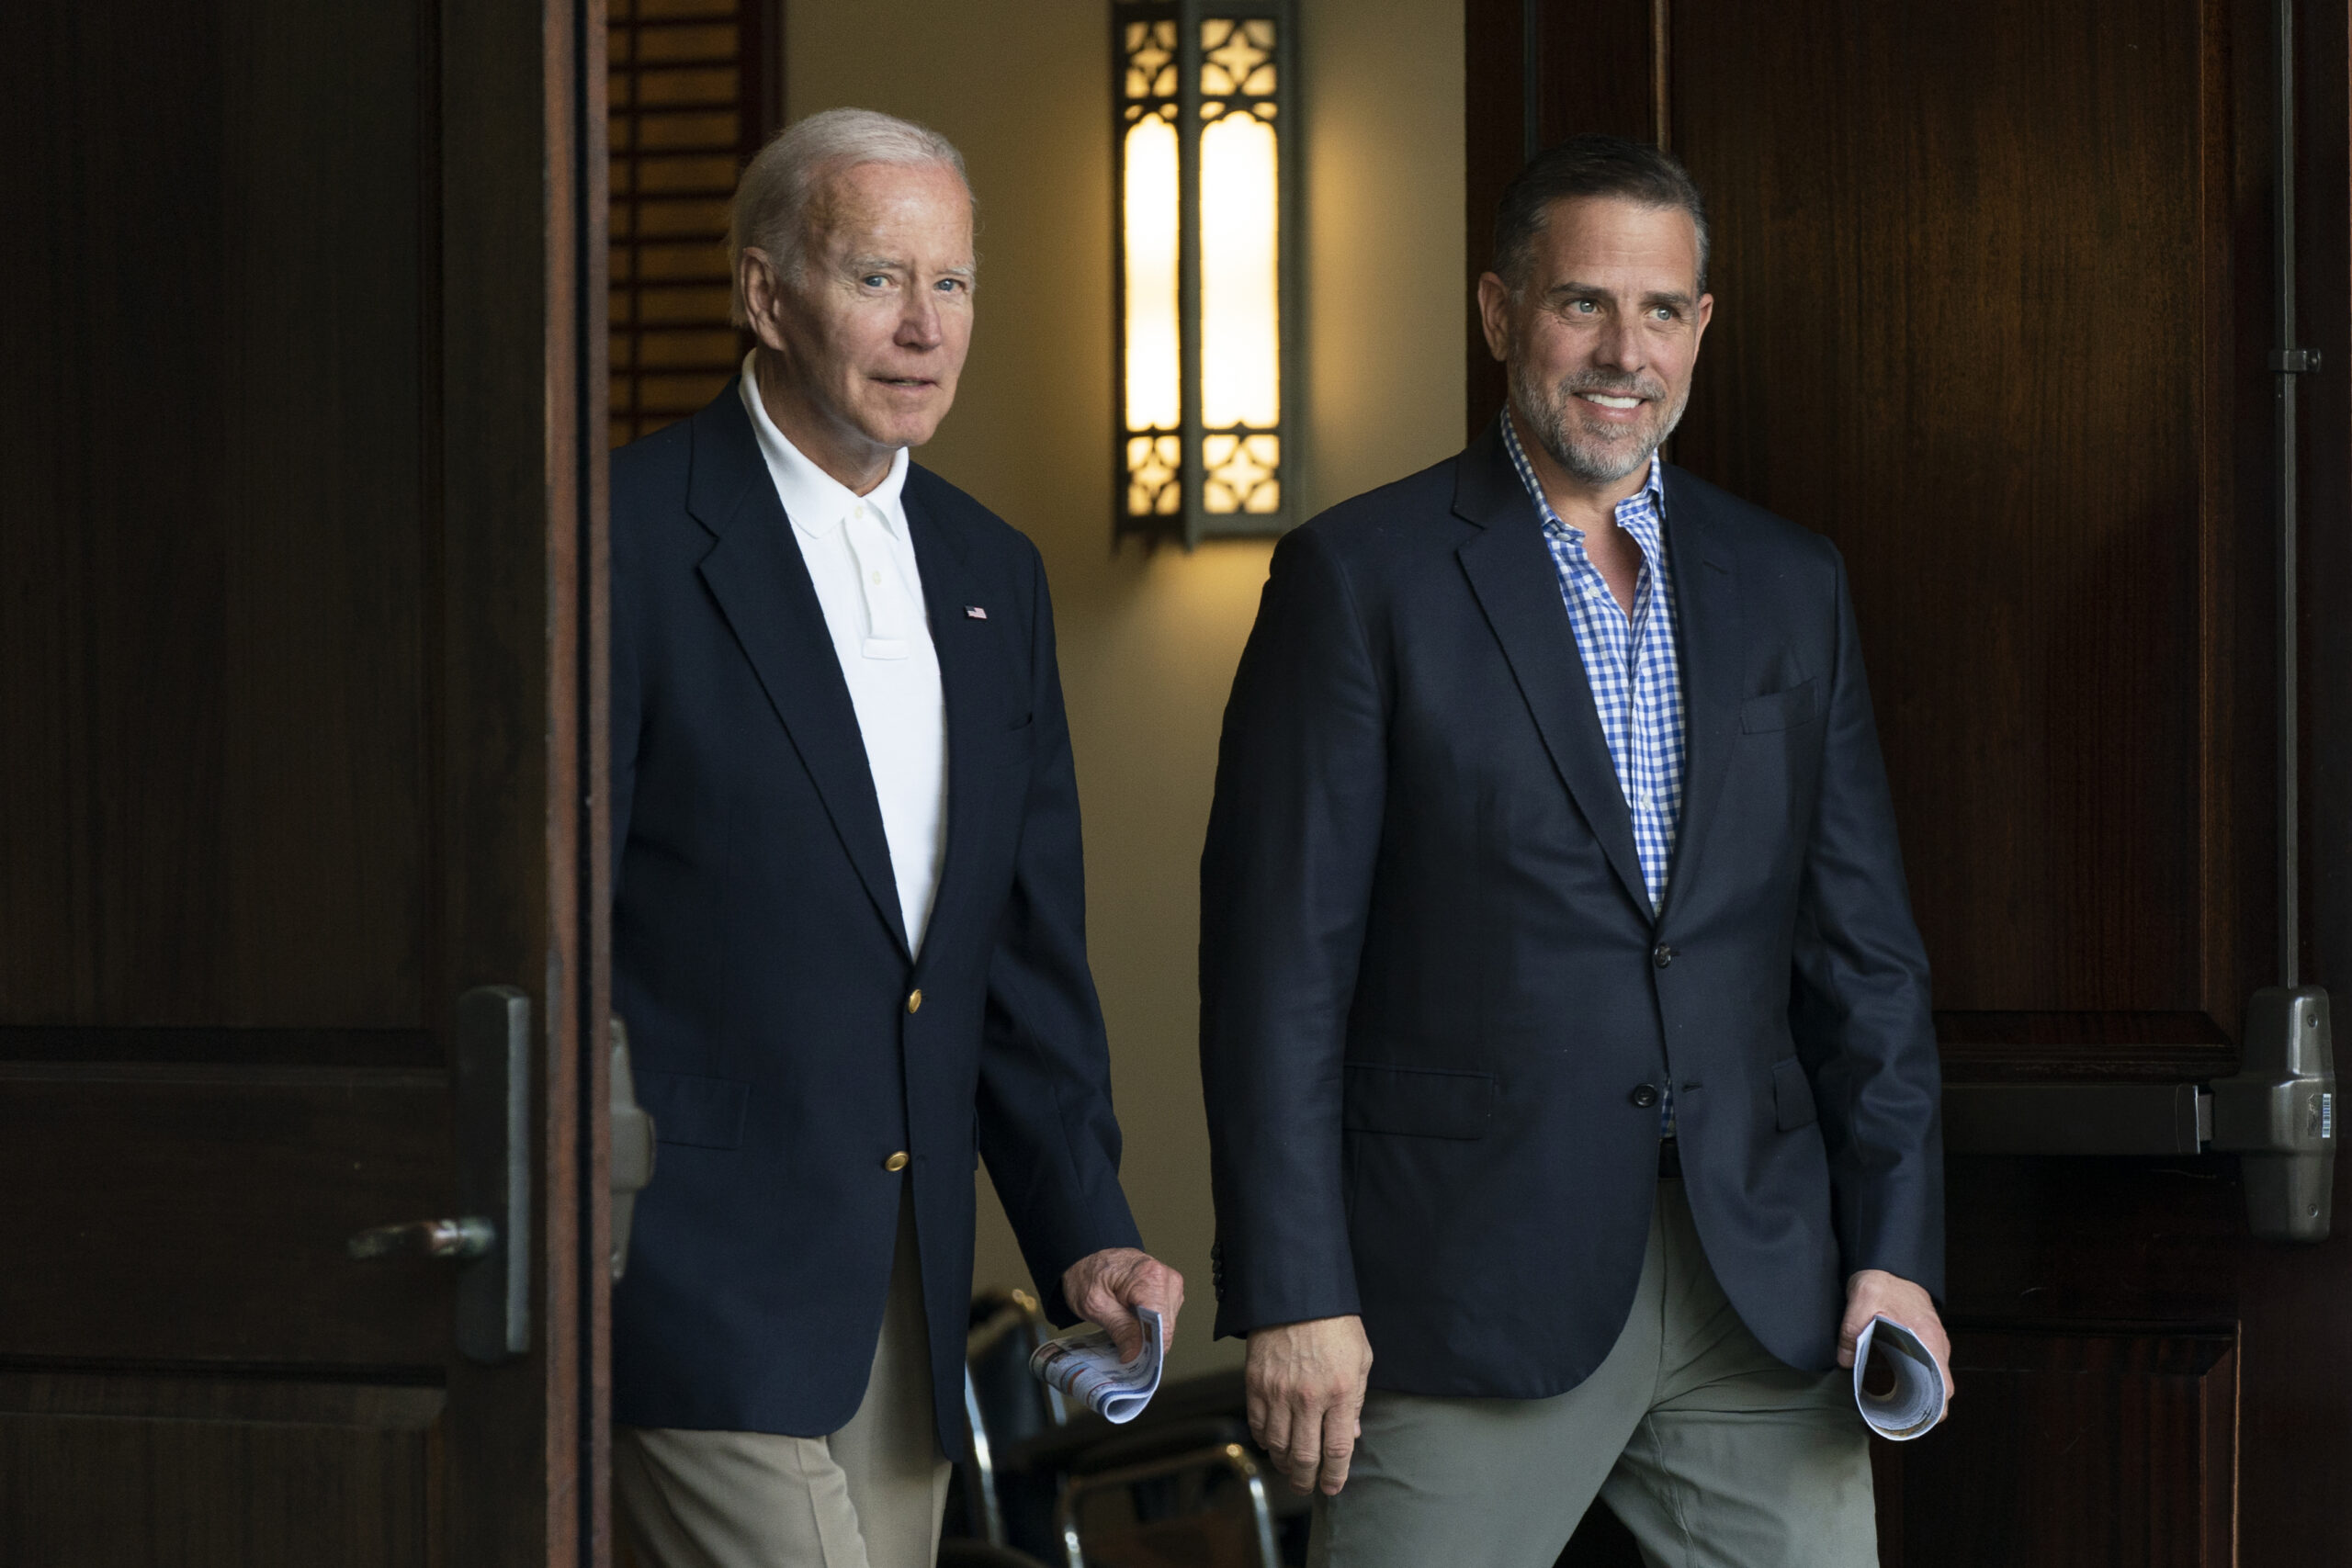 FILE - President Joe Biden and his son Hunter Biden leave Holy Spirit Catholic Church in Johns Island, S.C., after attending a Mass, Aug. 13, 2022. House Republicans have made the first official requests for documents from Hunter and James Biden regarding foreign business dealings. The letters Thursday further escalated a wide-ranging investigation into the president’s family.